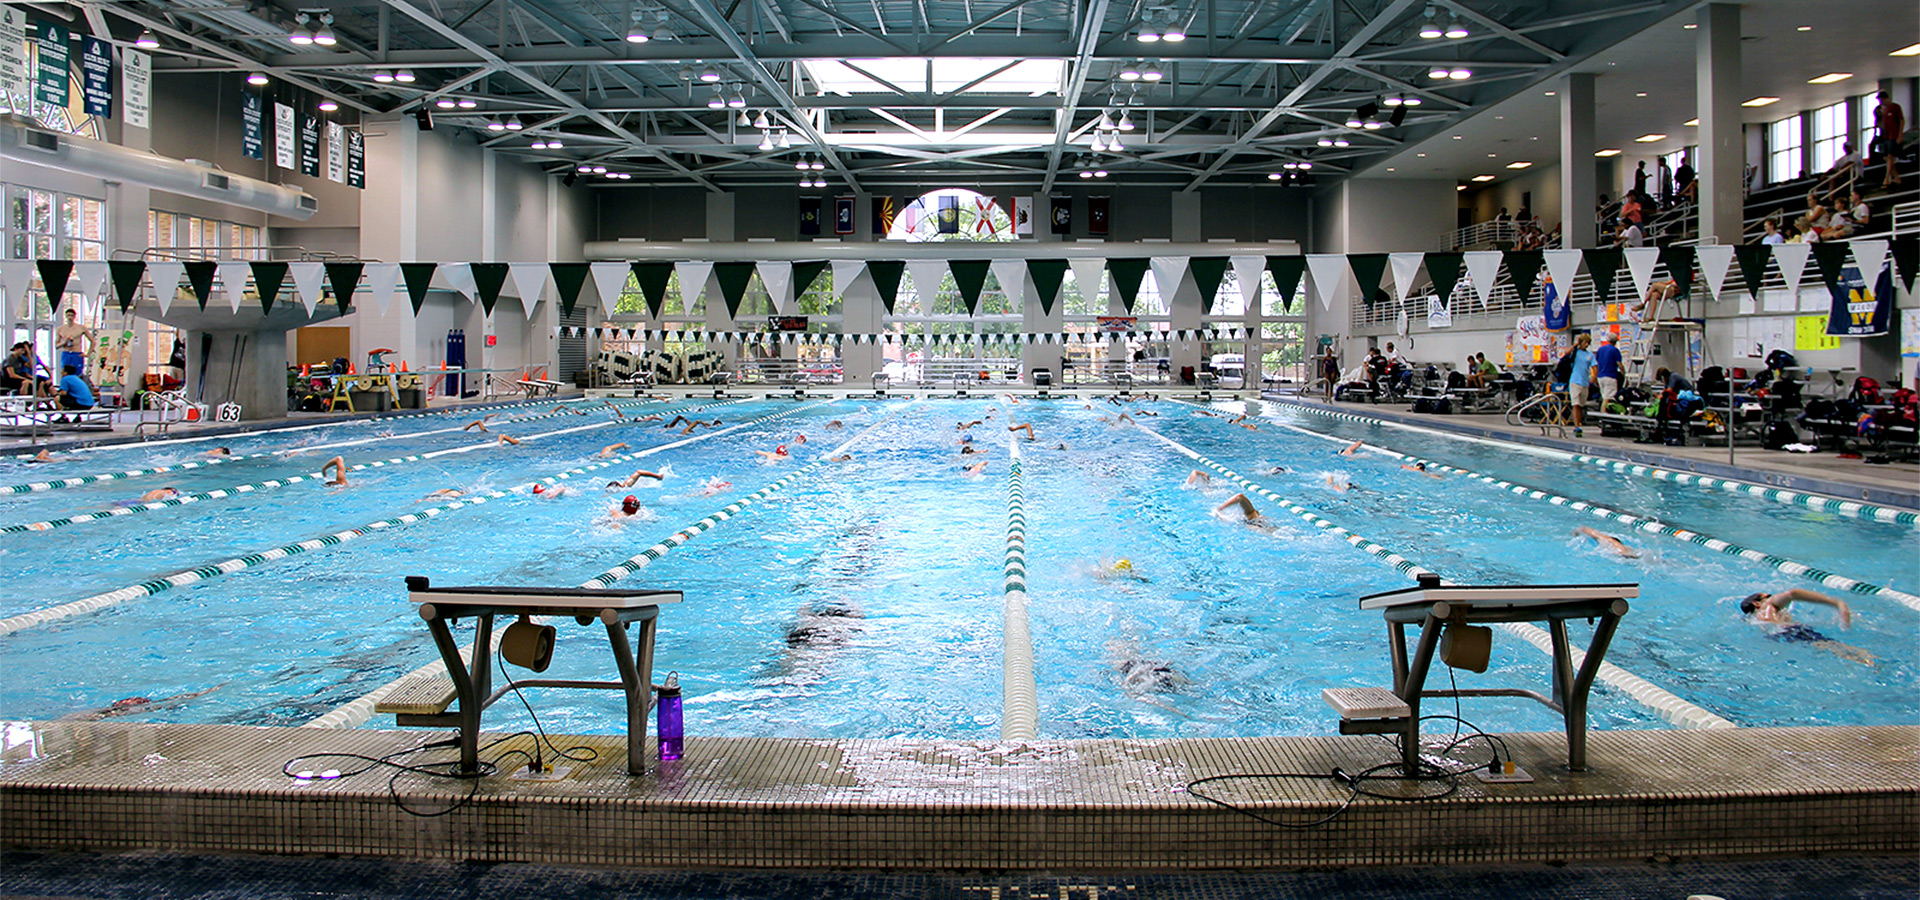 Caption: The Delta State Aquatics Center includes a 60-meter by 25-yard pool and has enough seating to accommodate over 2,500 people. 